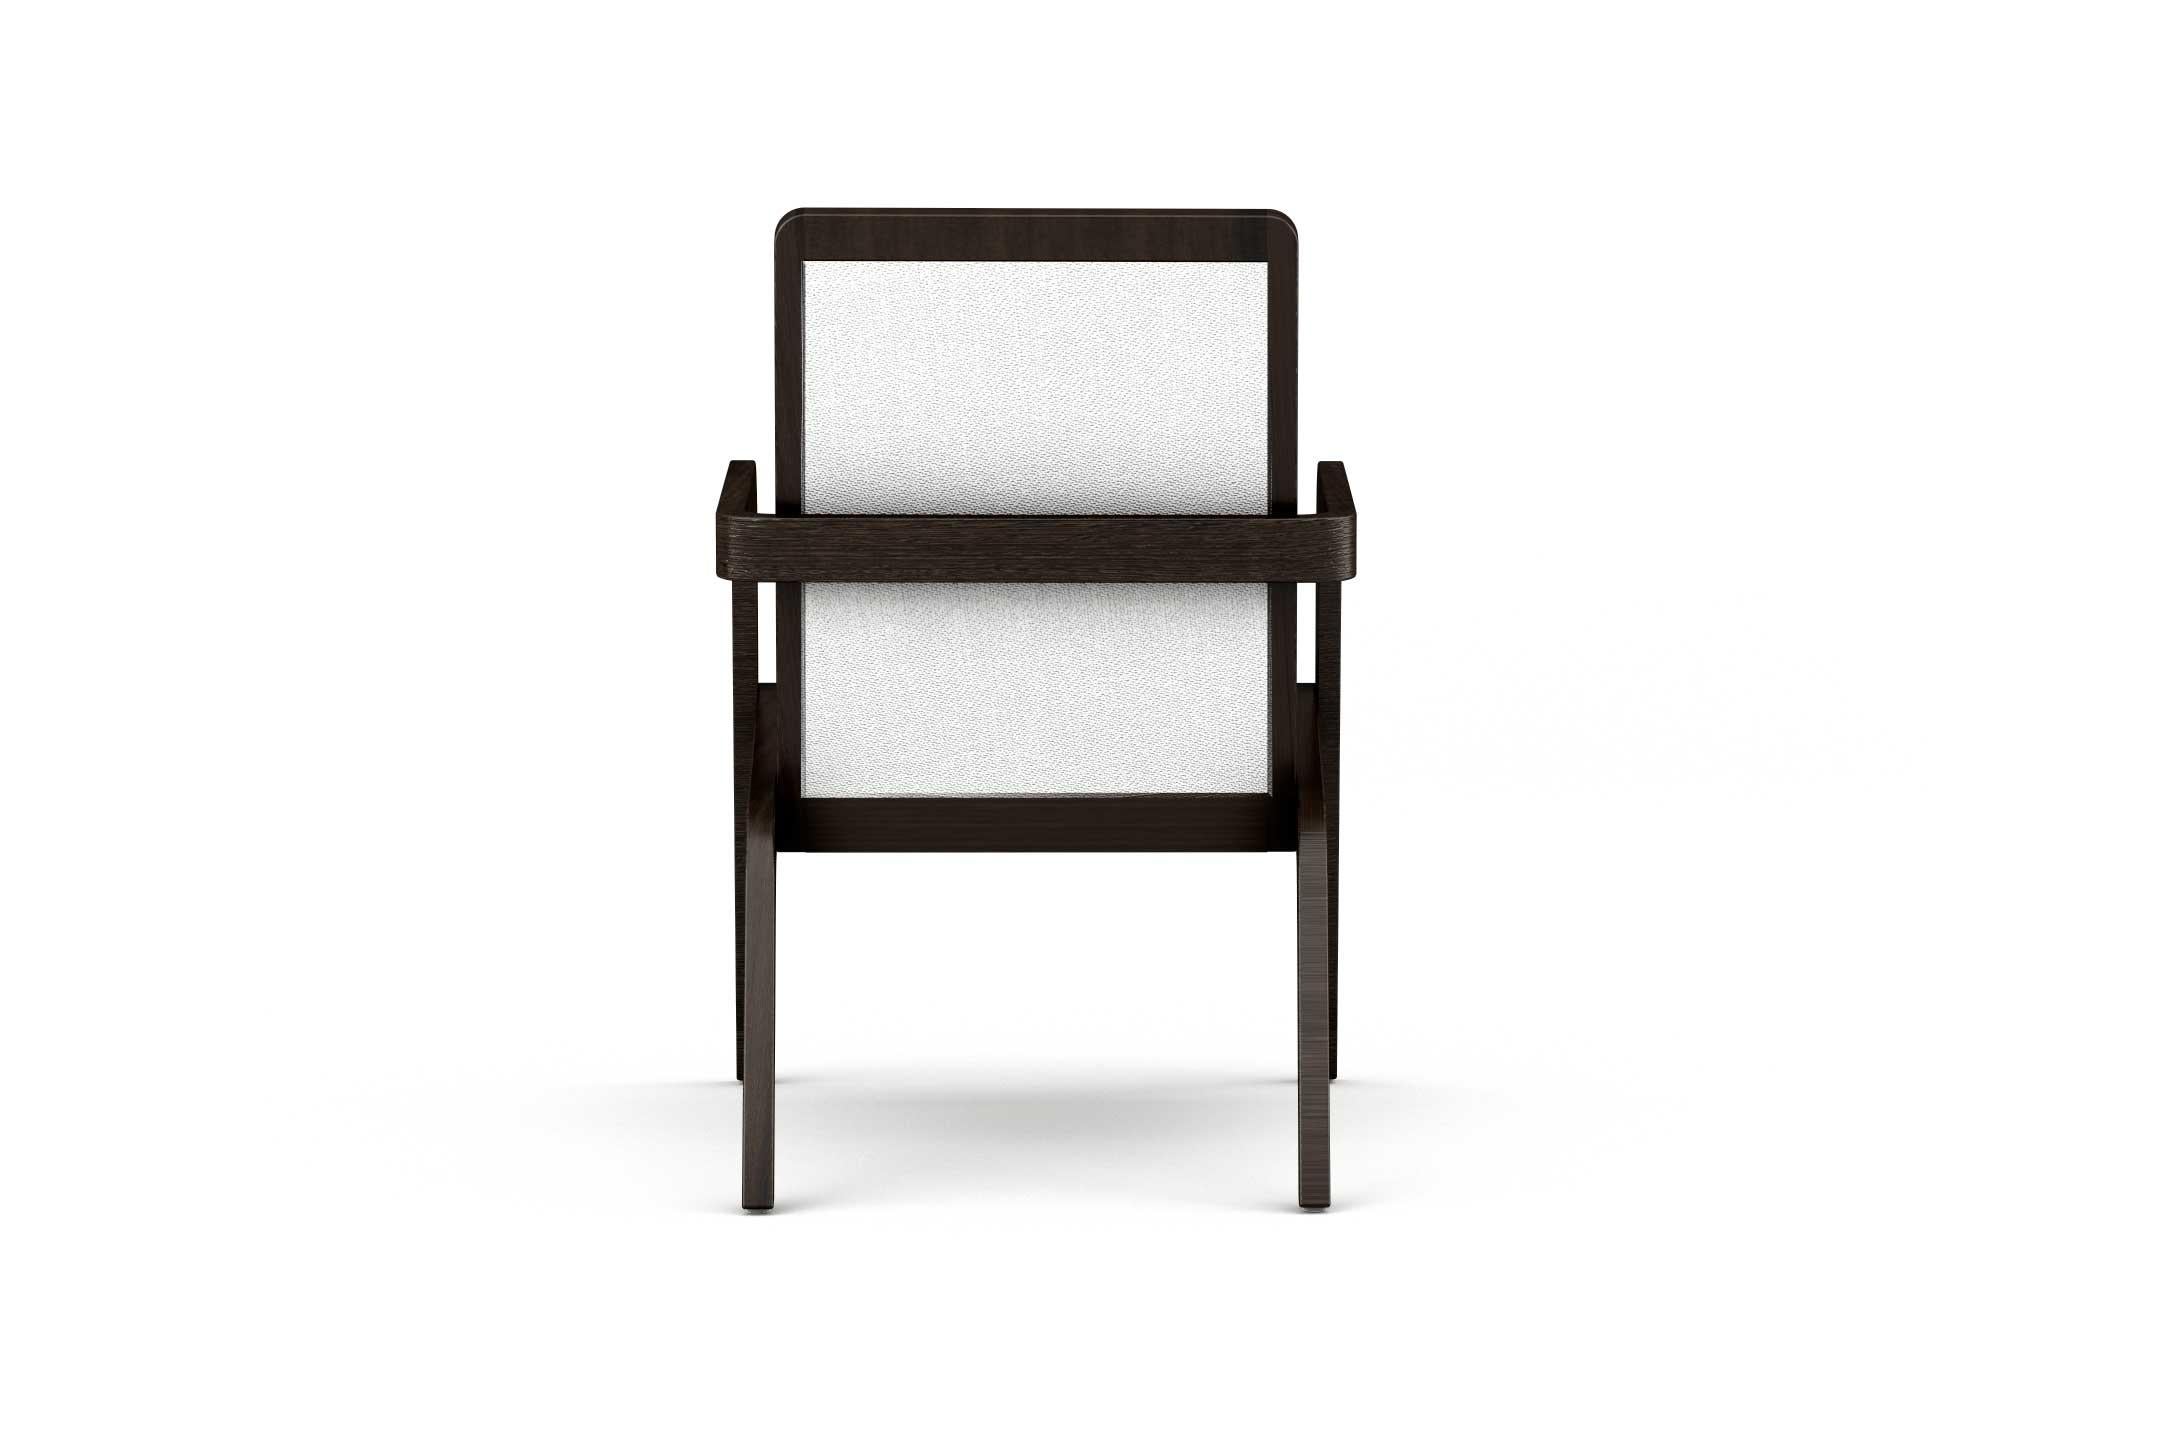 Stained 8 Umbra Armchairs - Modern and Minimalistic Black Armchair with Upholstered Seat For Sale